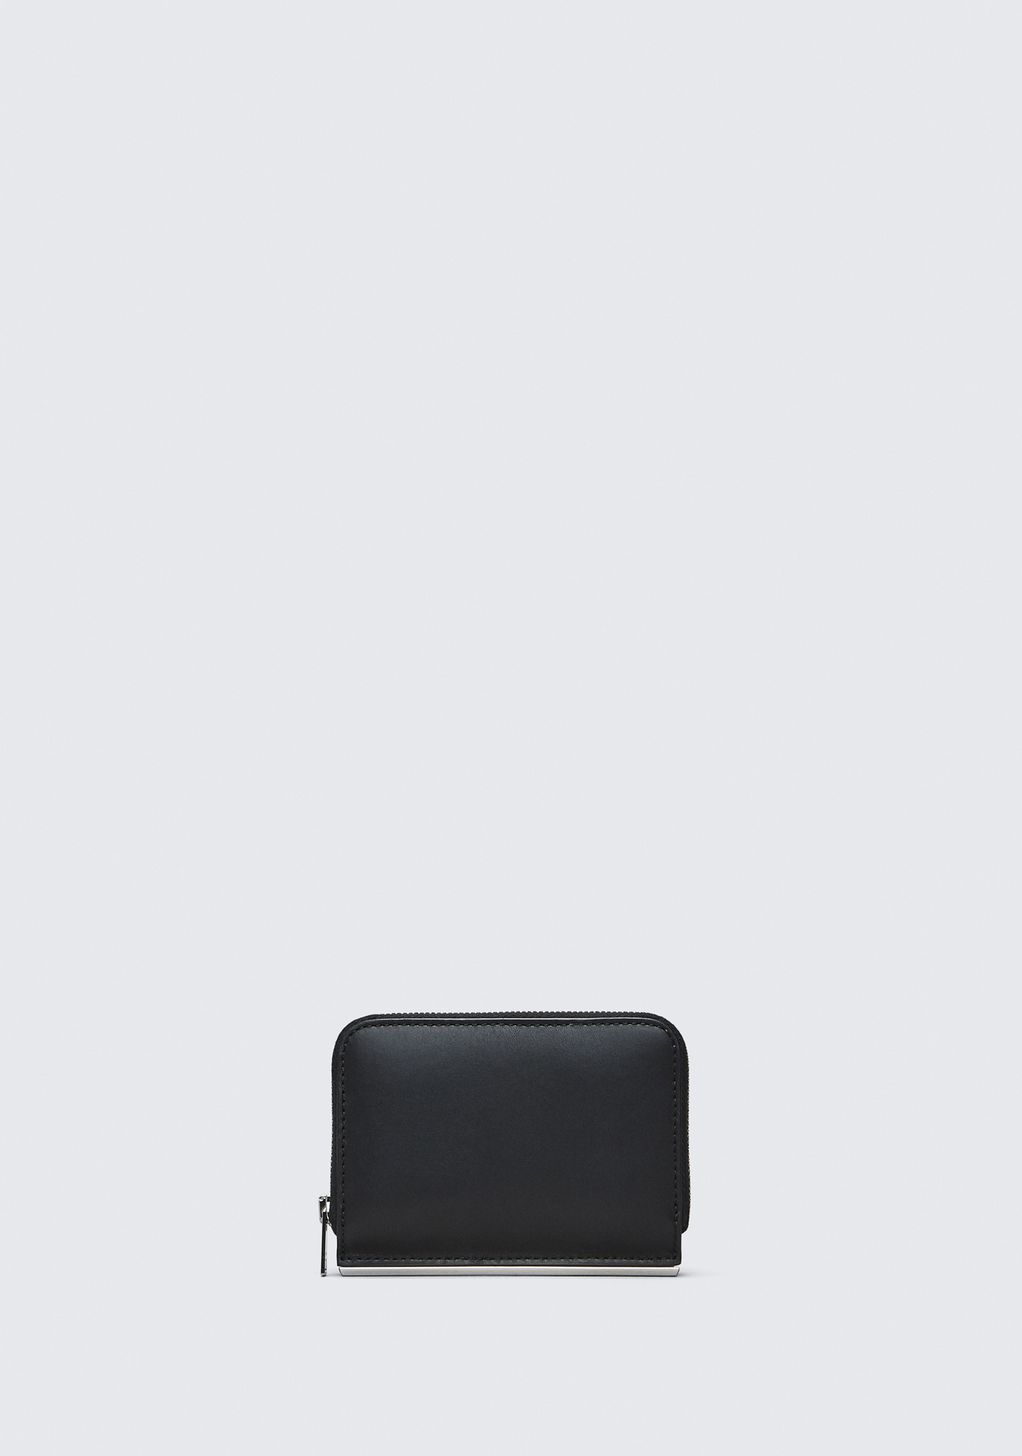 Alexander Wang ‎DIME MINI COMPACT WALLET BAR IN BLACK ‎ ‎SMALL LEATHER ...